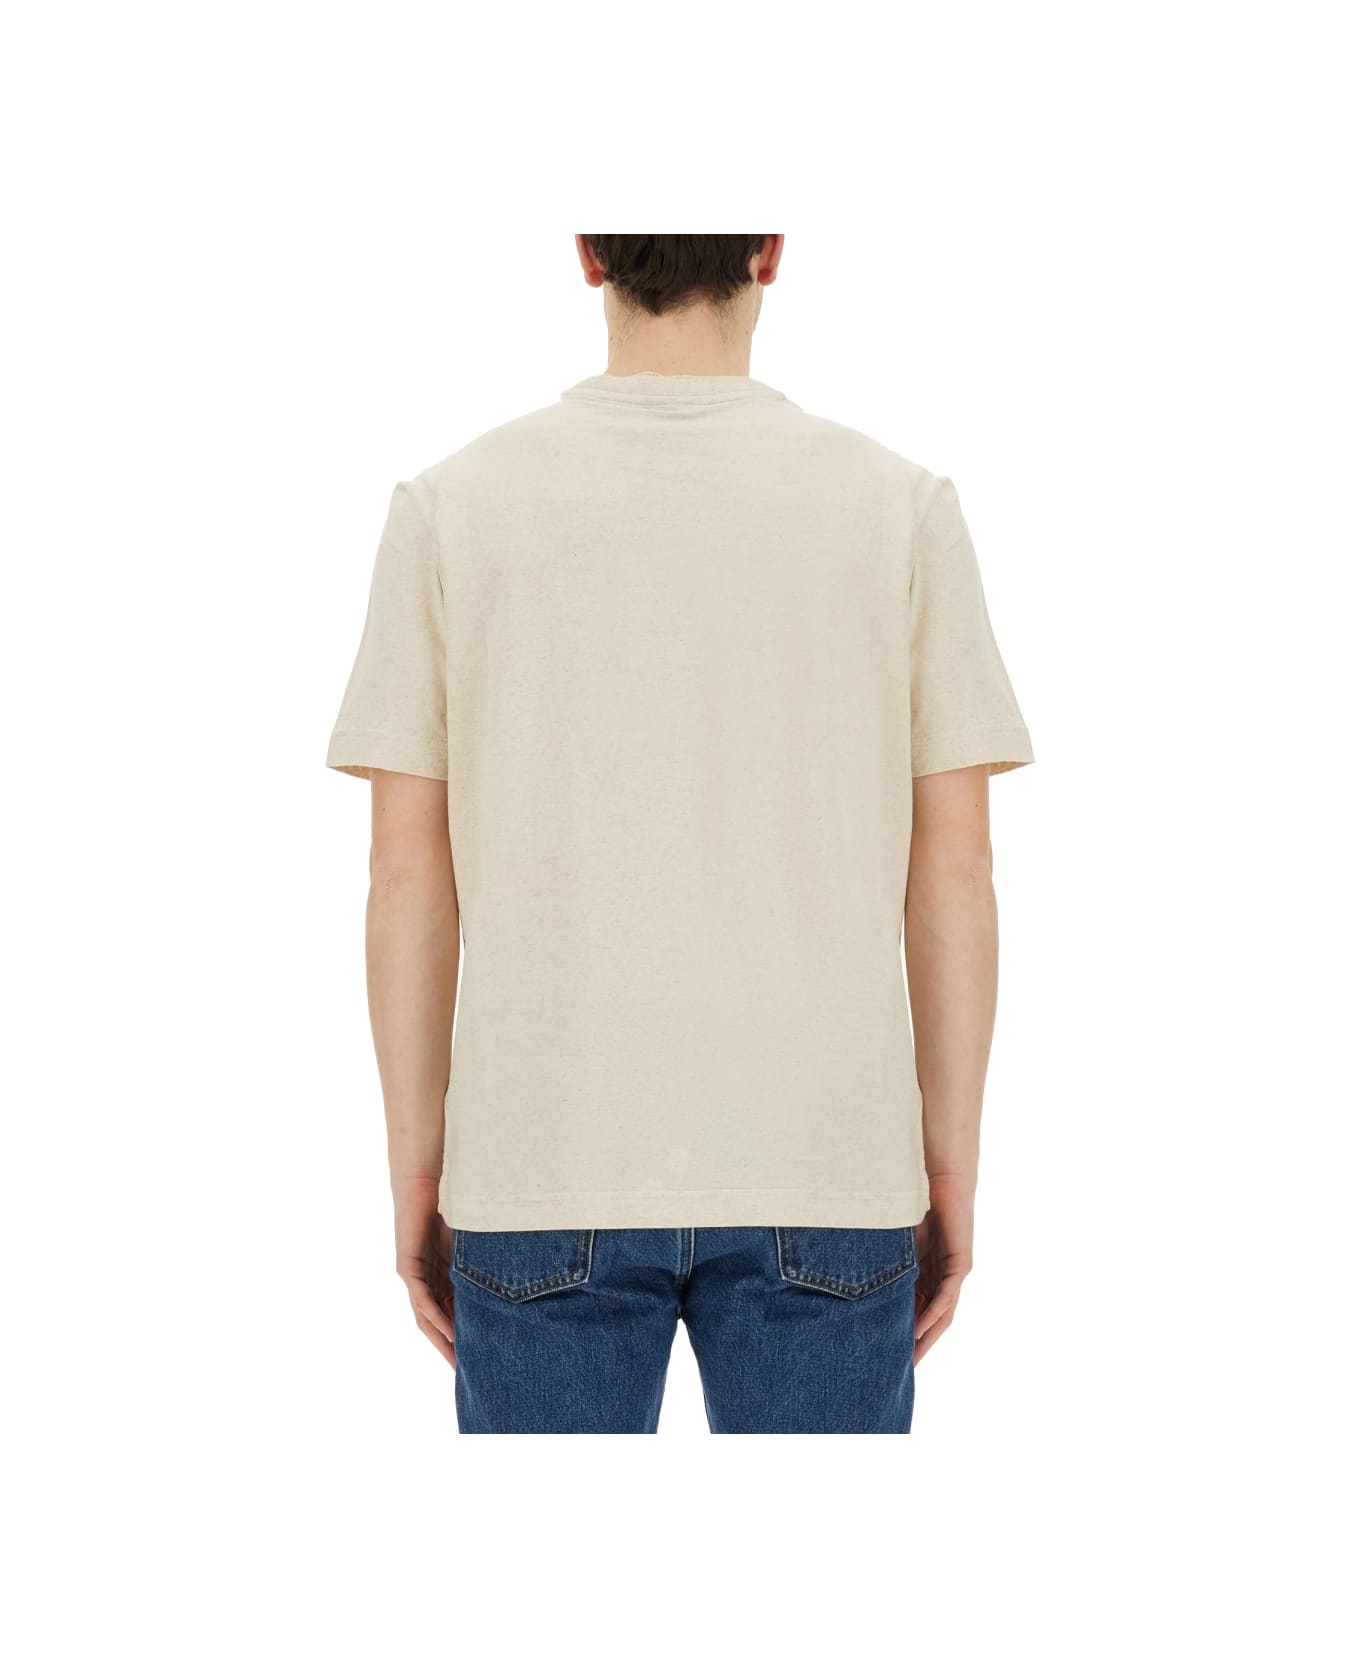 PS by Paul Smith "rabbit" T-shirt - BEIGE